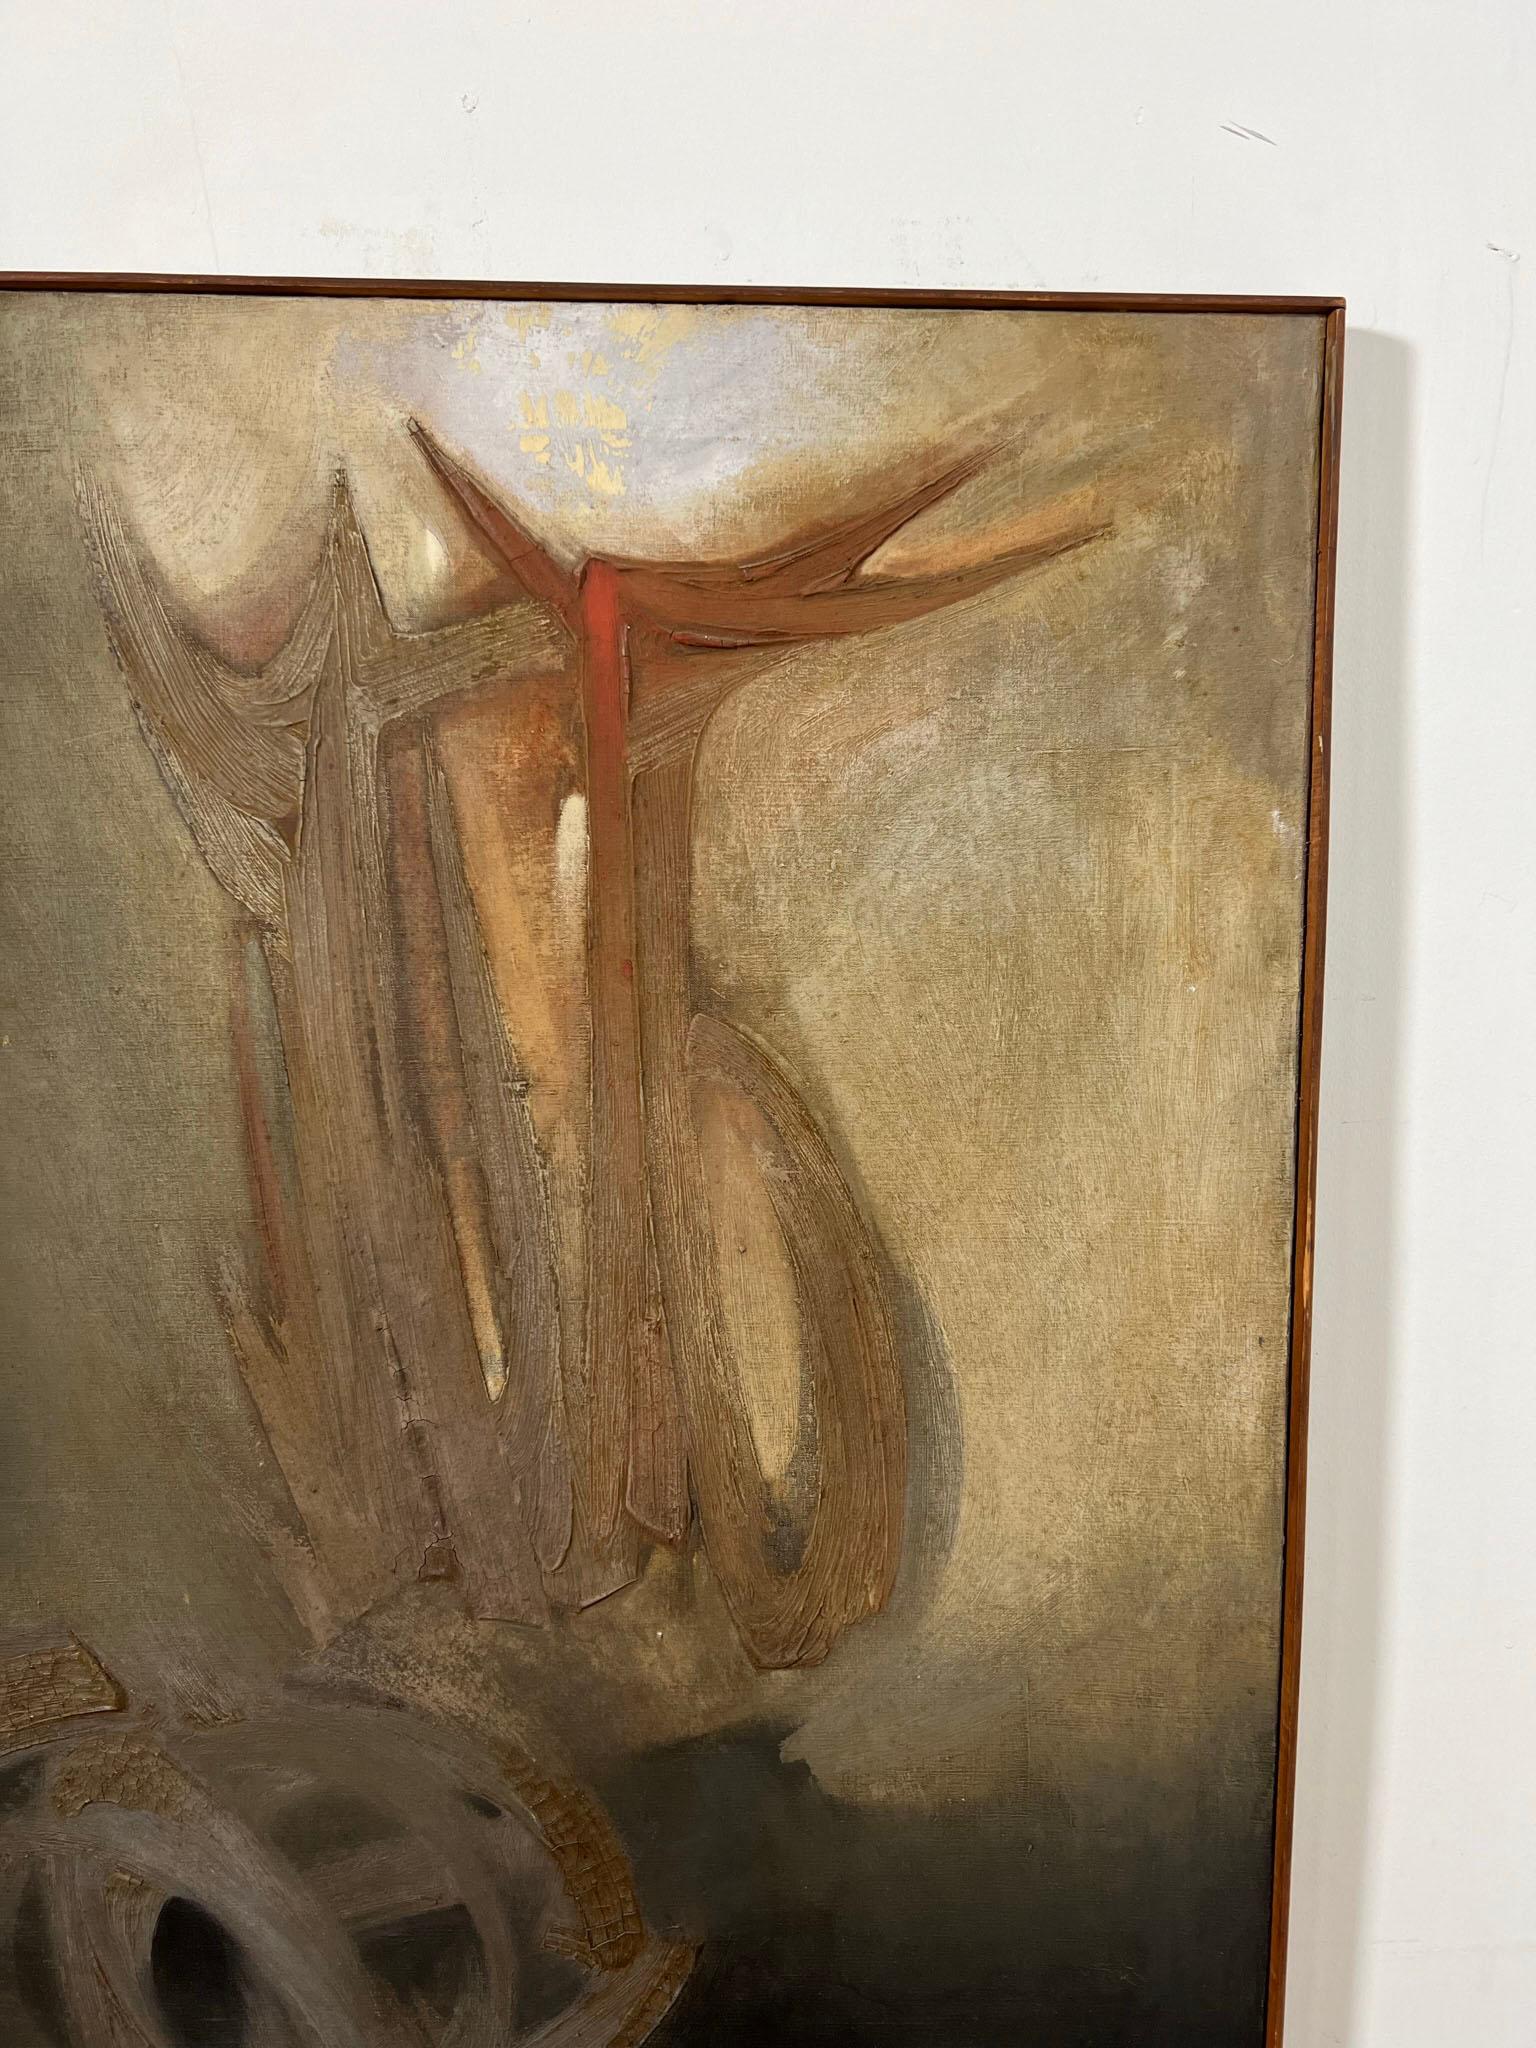 An atmospheric modernist abstract expressionist oil by the Spanish painter Vicente Vela, dated 1962